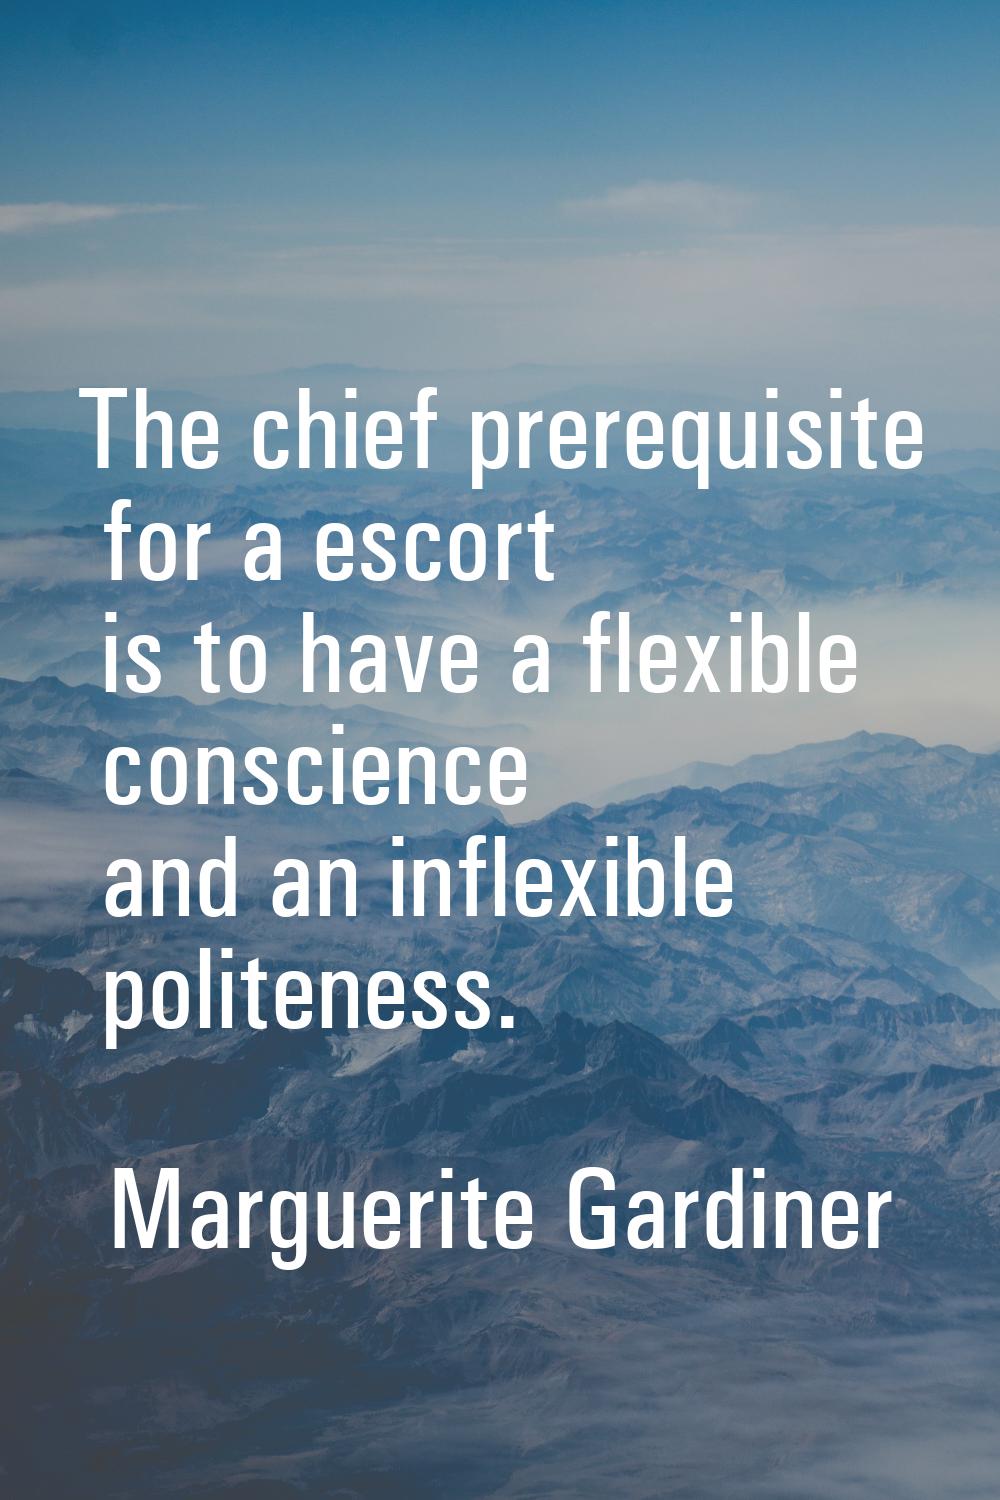 The chief prerequisite for a escort is to have a flexible conscience and an inflexible politeness.